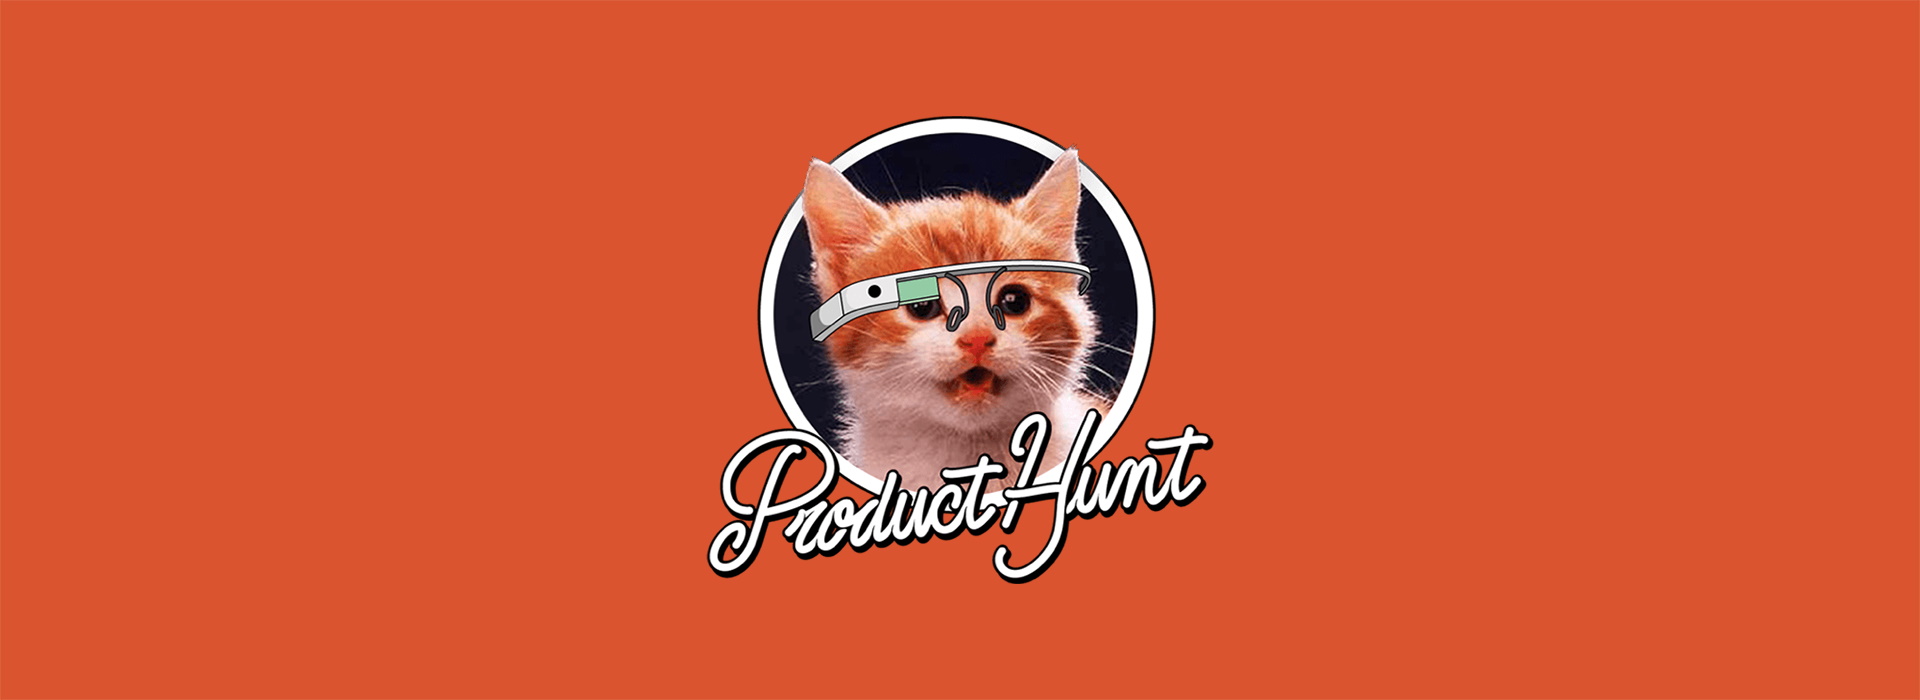 Posting to Product Hunt